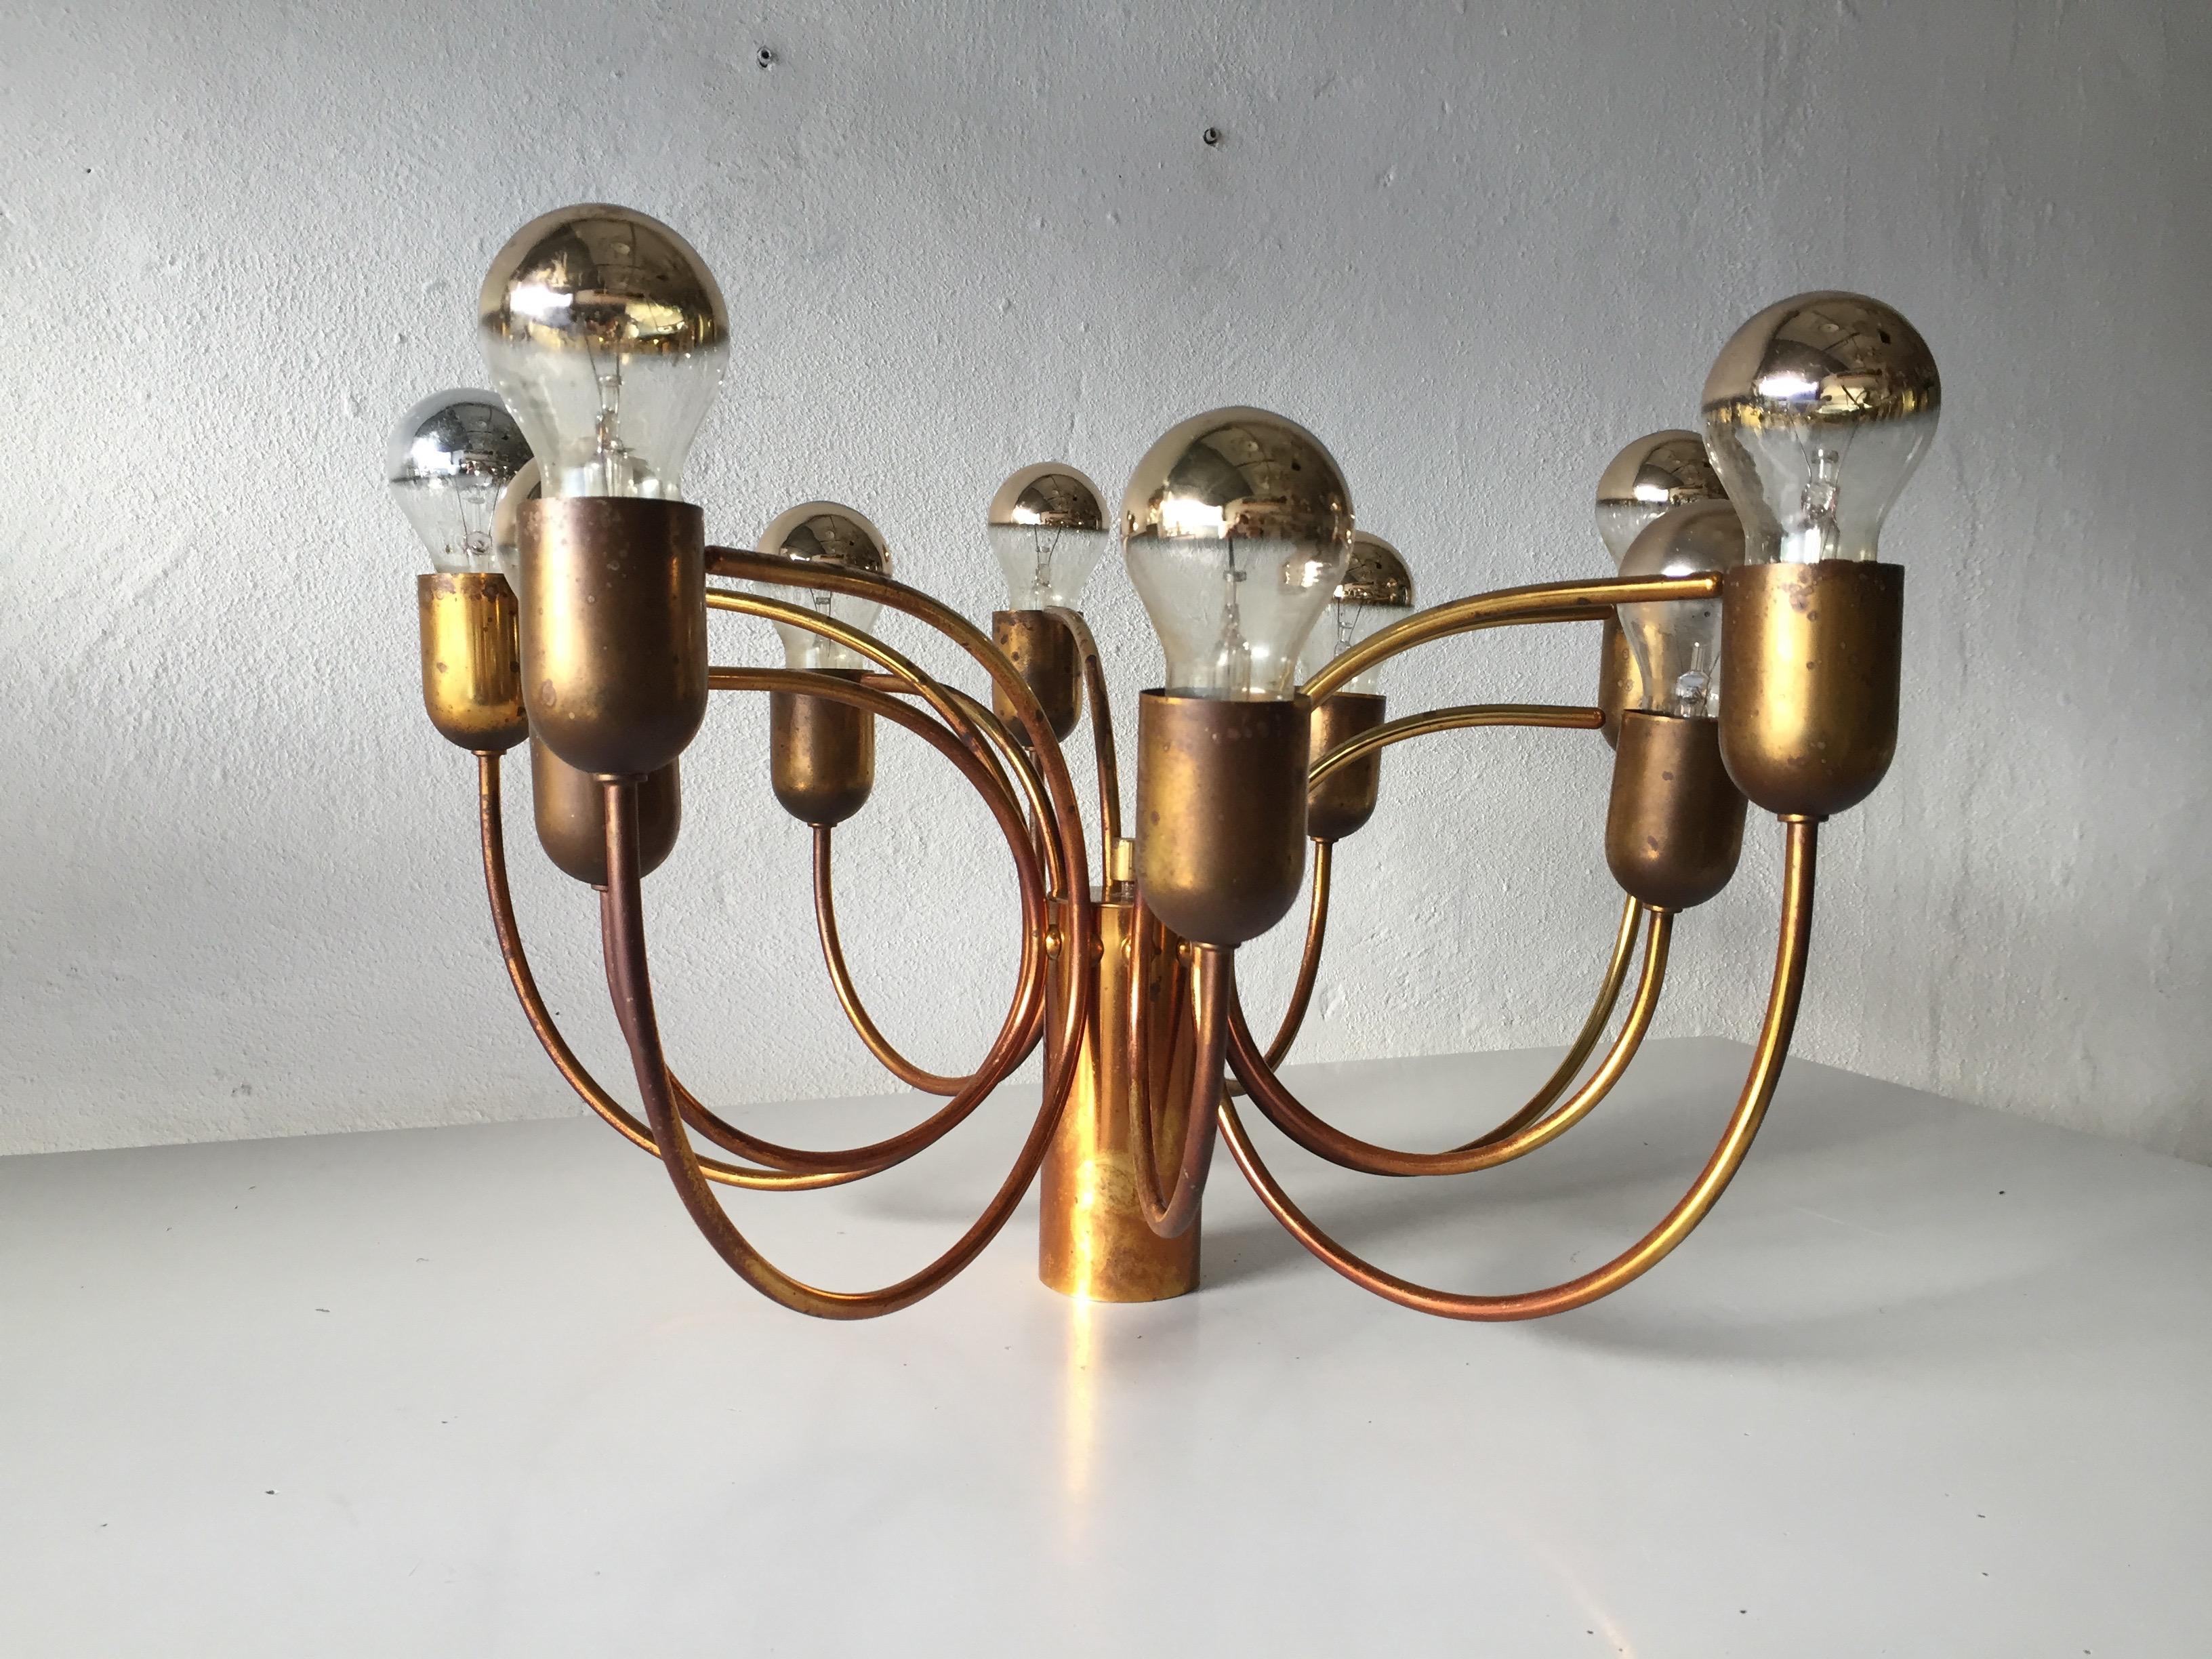 Rare 10 Arc Shaped Arms full brass chandelier by Cosack Leuchten, 1970s Germany

Pendant lamp with beautiful patina
Minimal design
Very high quality.
Fully functional.

Lamps are in very good vintage condition.
Wear consistent with age and